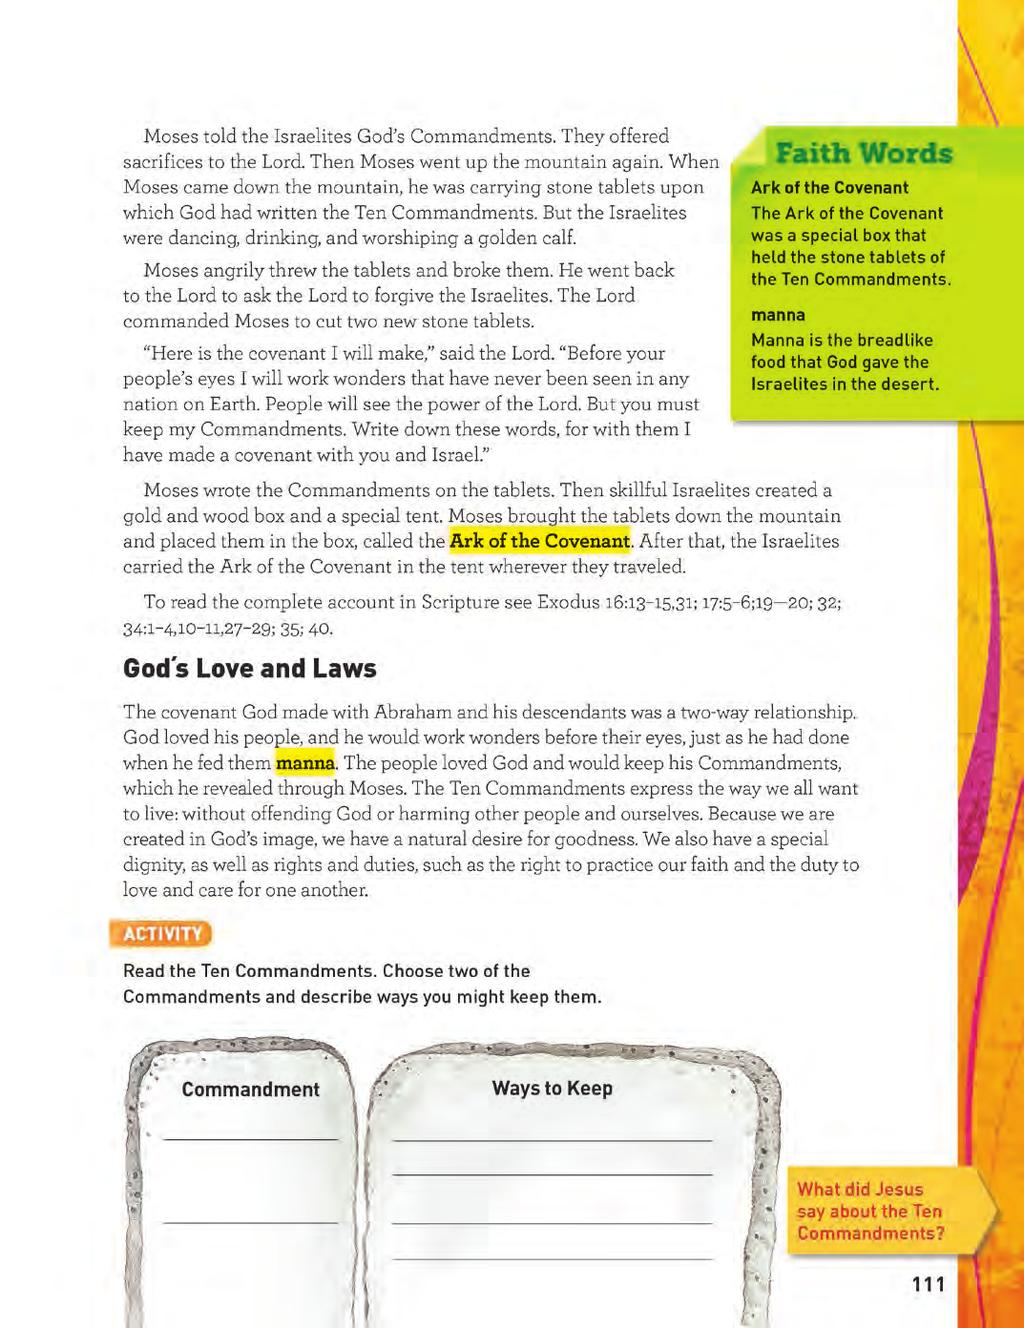 Grade 6 Hear and Believe Page SPECIAL FEATURES 55 The Faith Words side bar box provides